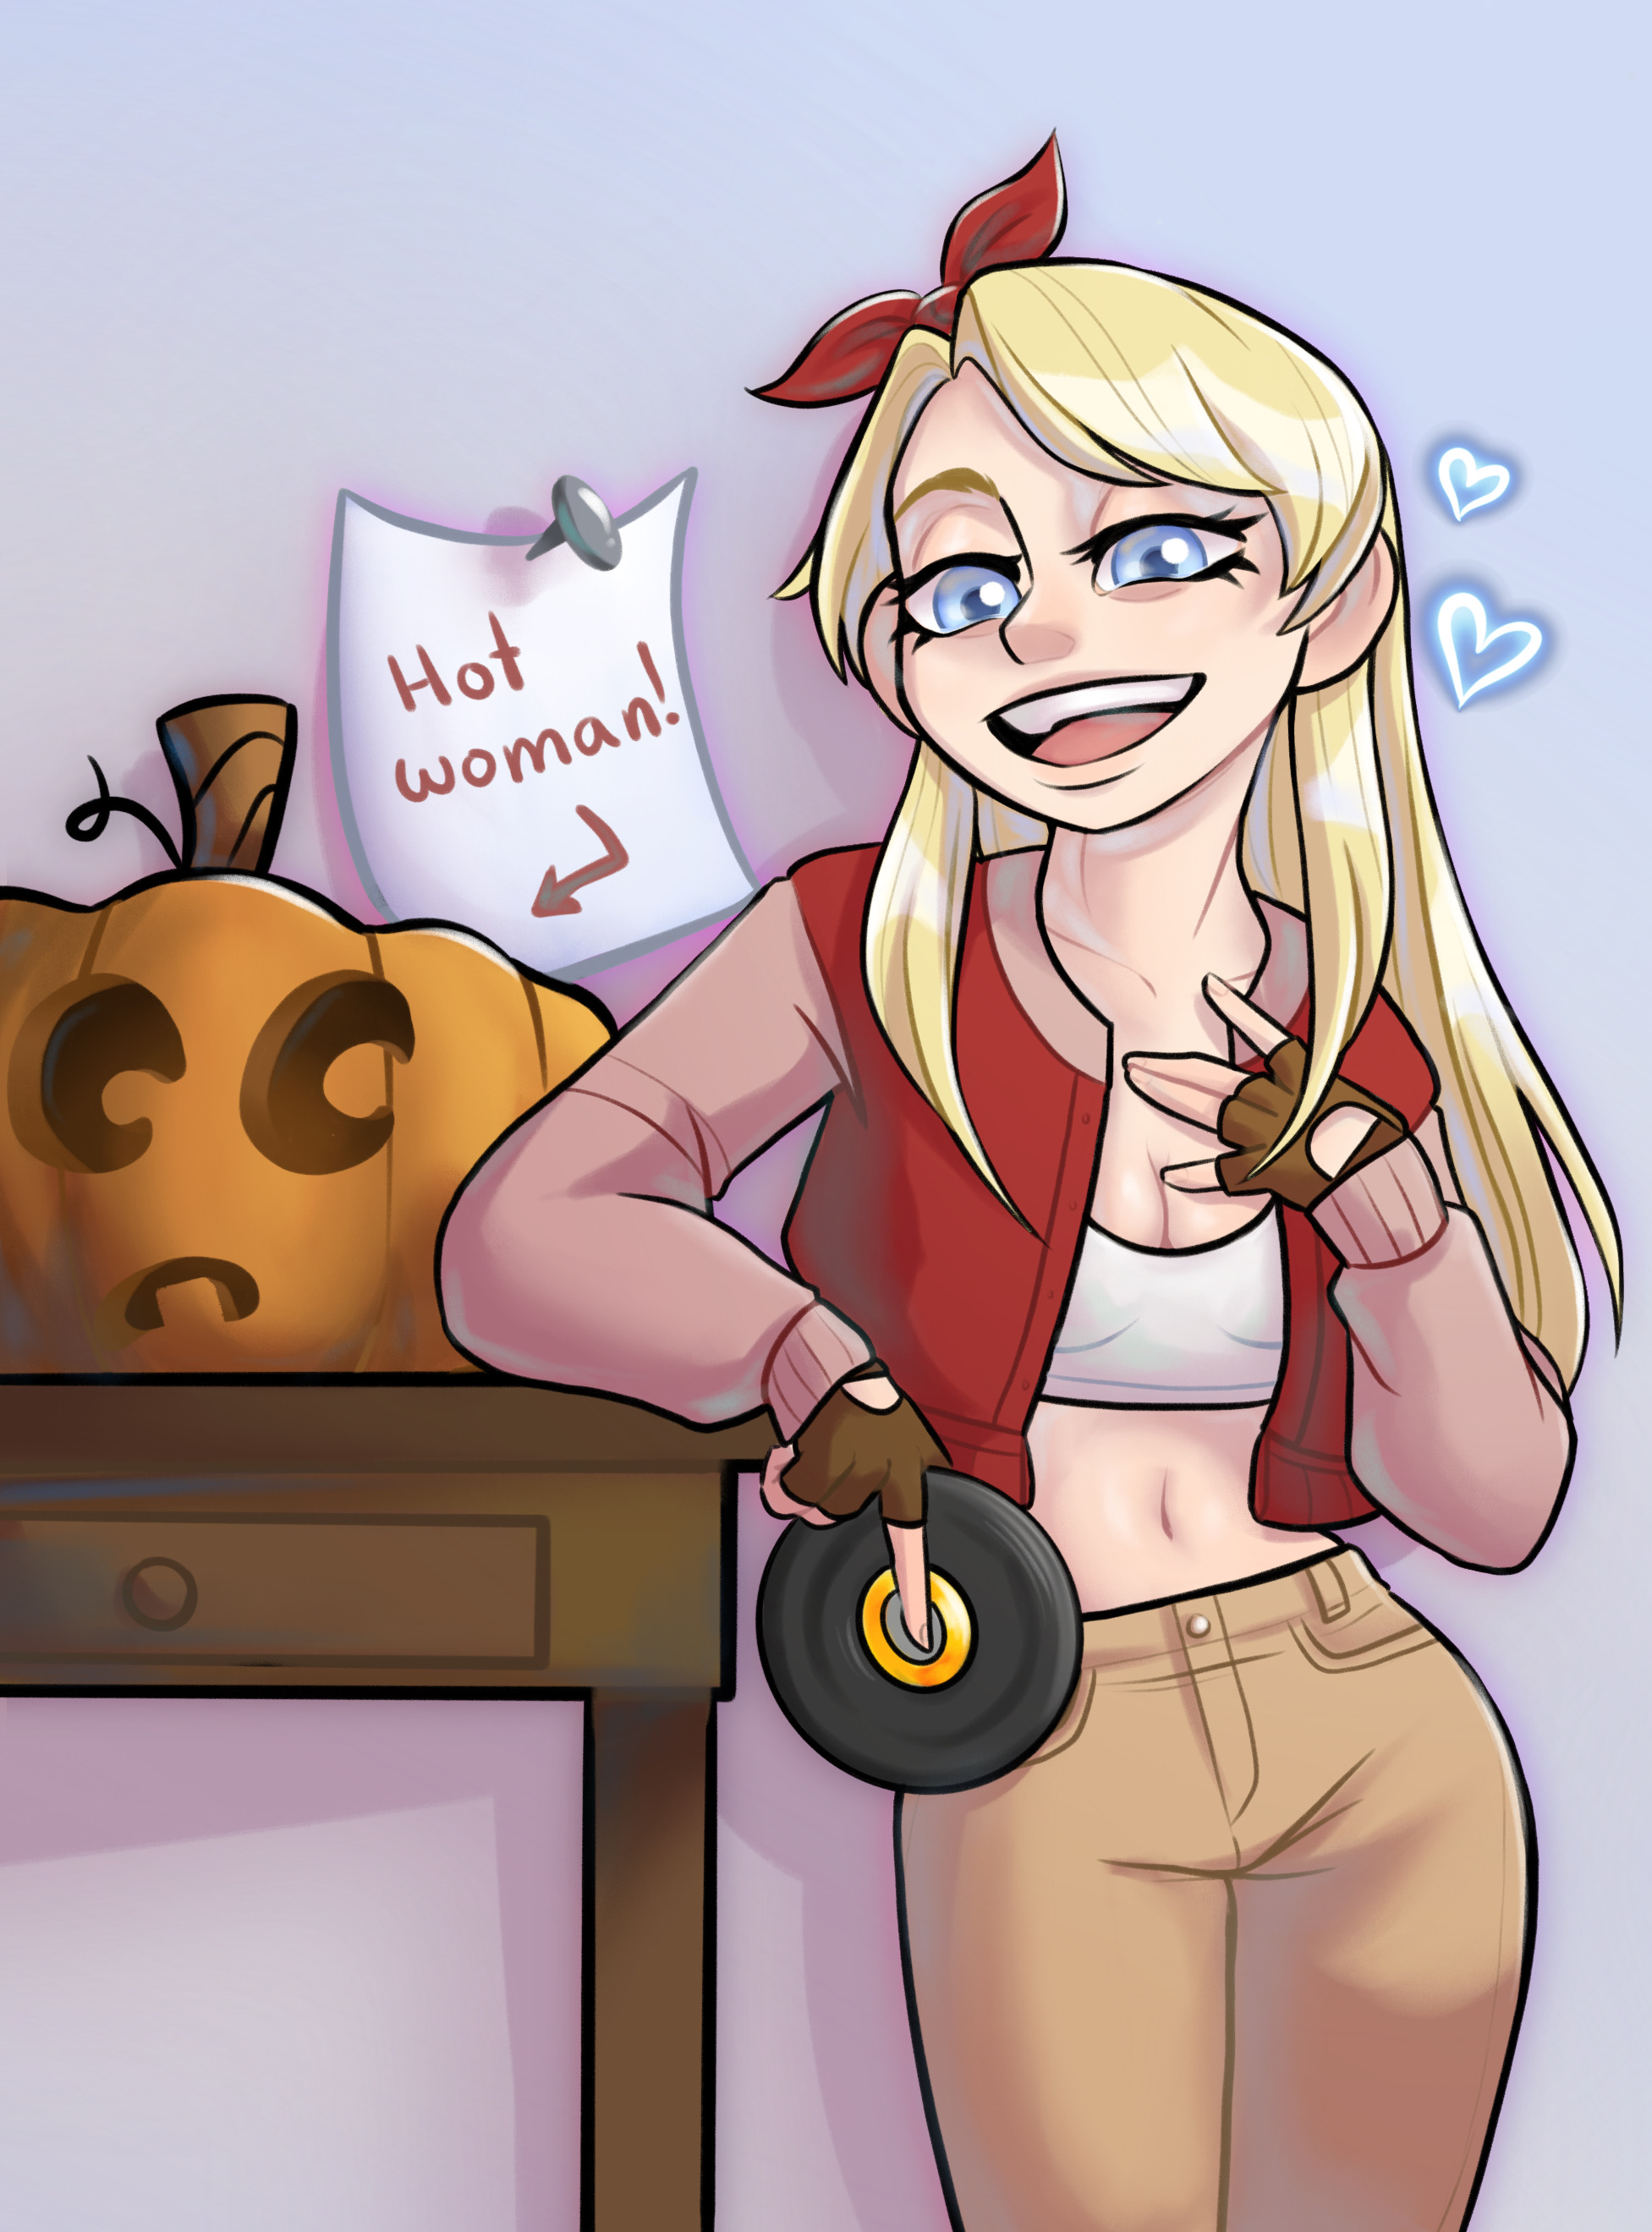 Tommyinnit when Hot sexy woman by CommonColdWasTaken on DeviantArt